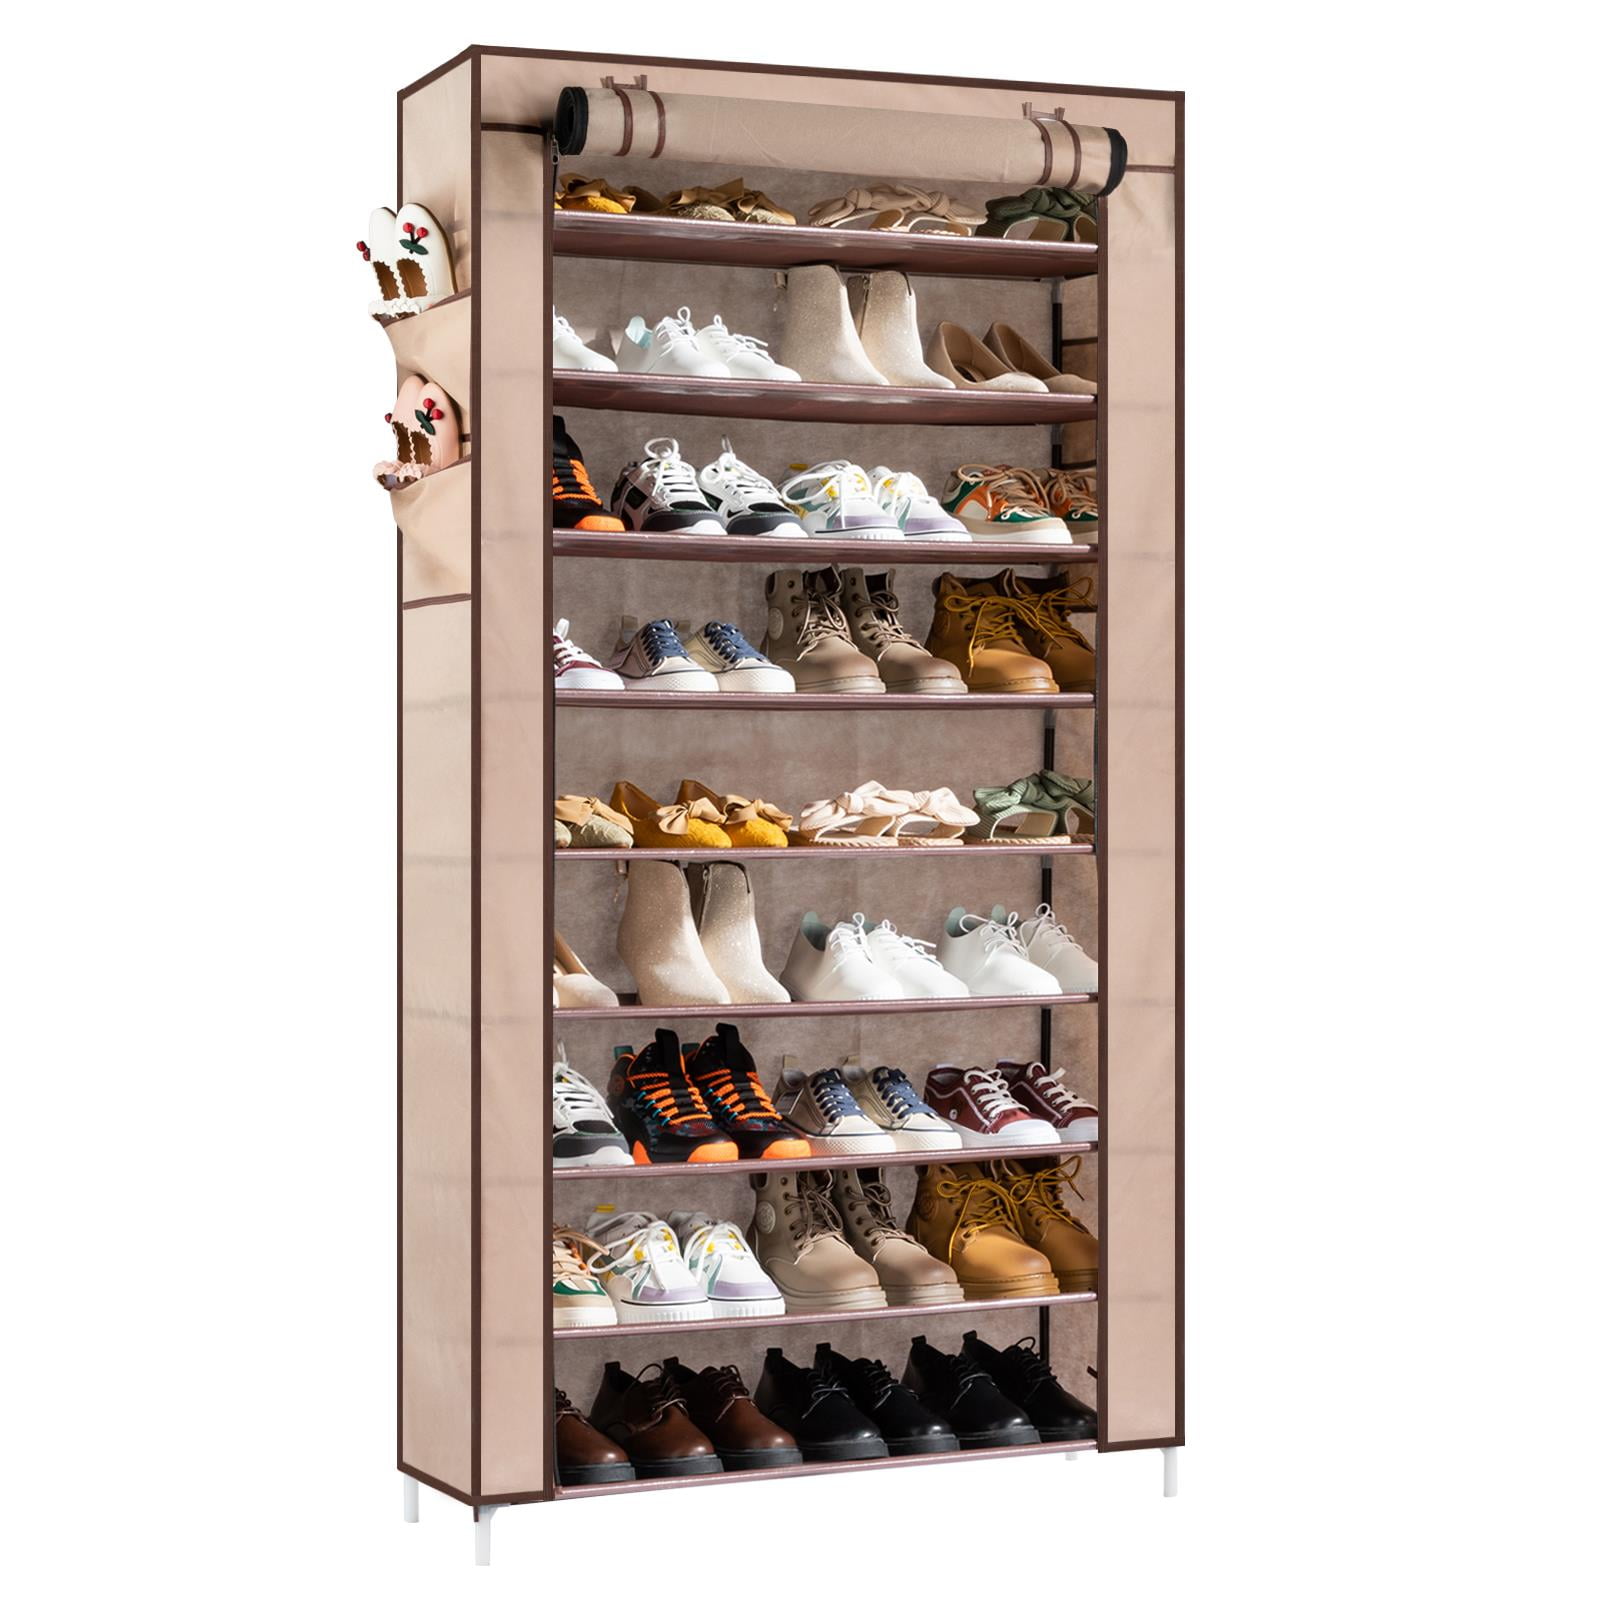 Zimtown 10 Tiers 45 Pairs Shoe Rack Shoe Shelf Shoe Storage Cabinet  Organizer Space Saving Shoes Tower with Non-woven Fabric Cover Closet, Free